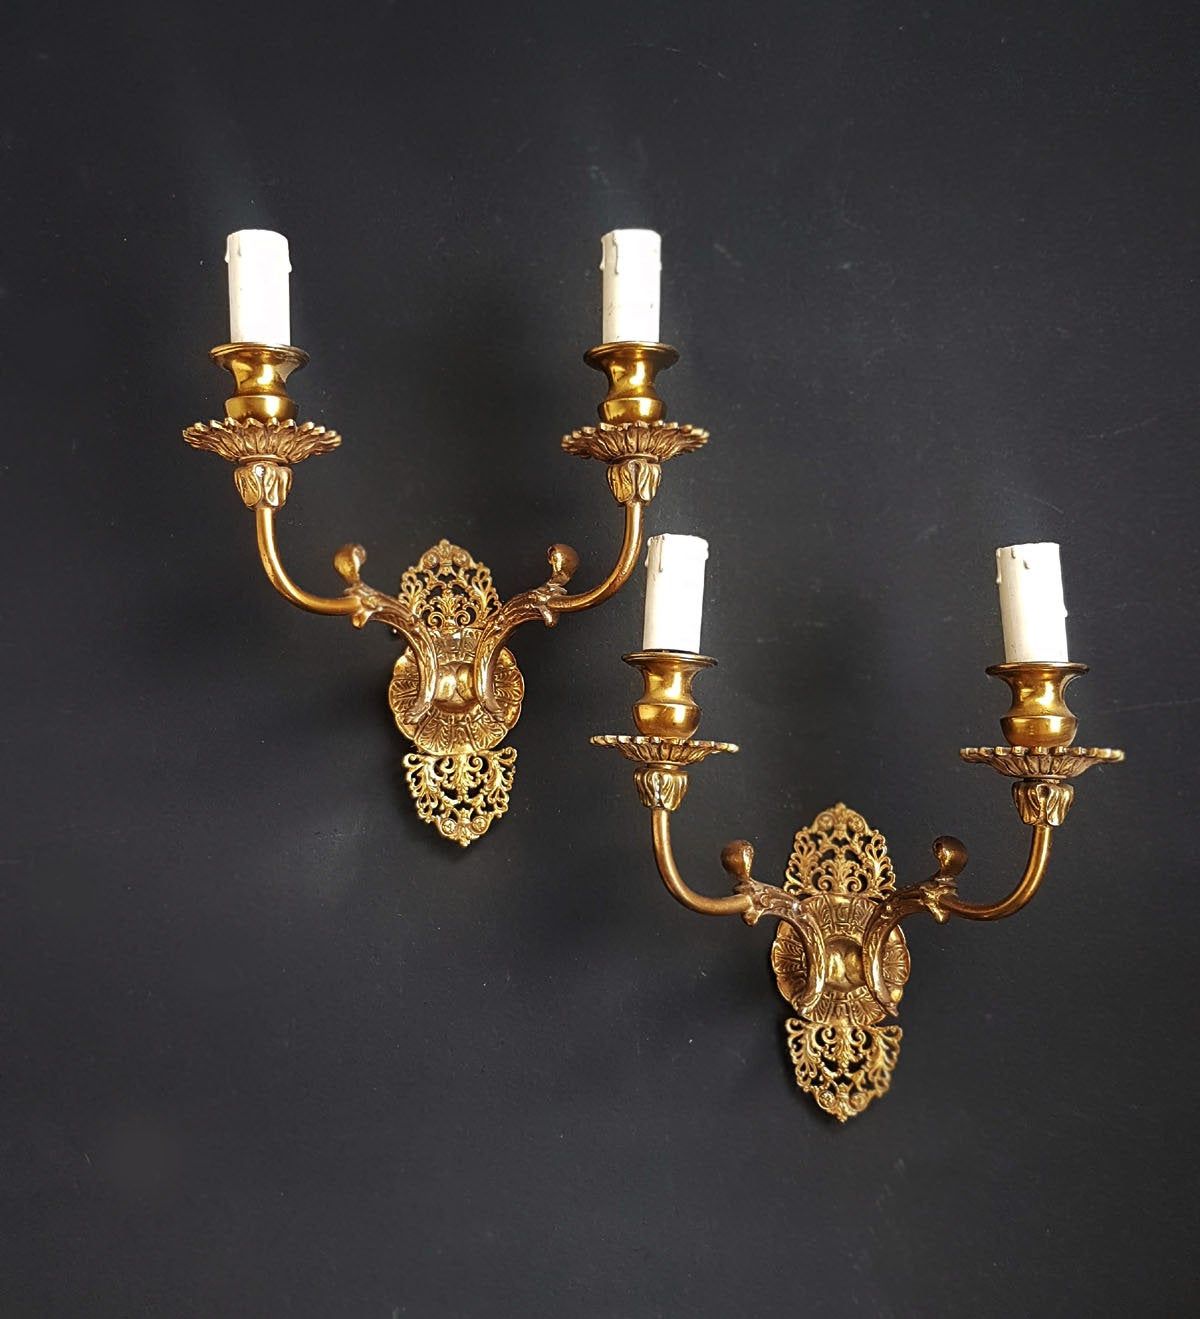 Antique French Wall Sconces Pair